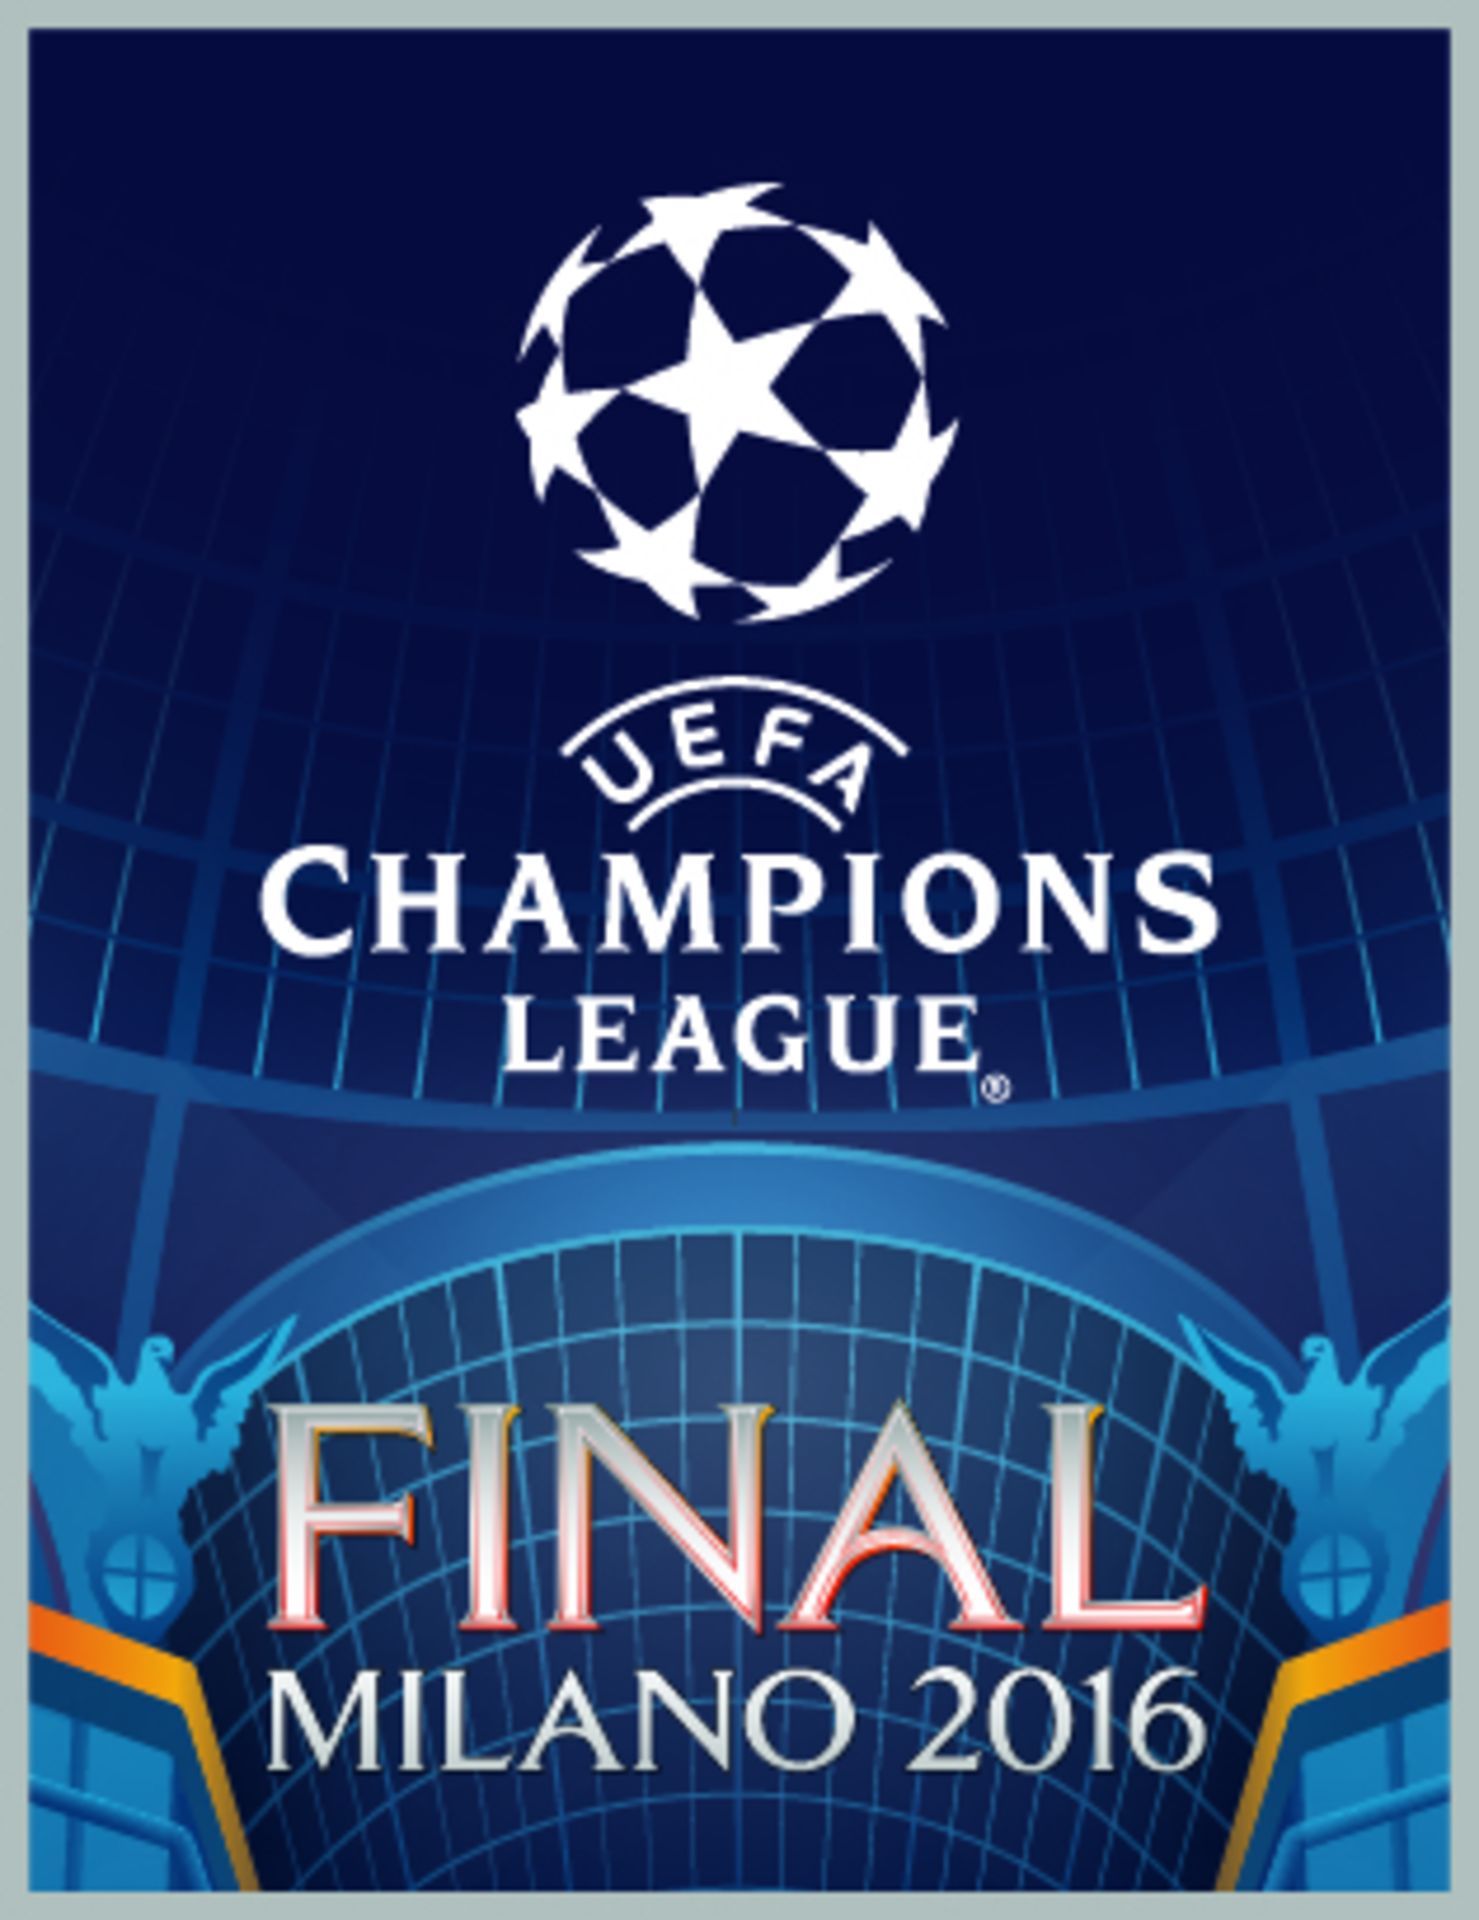 Guests of UEFA for the Champions League Final